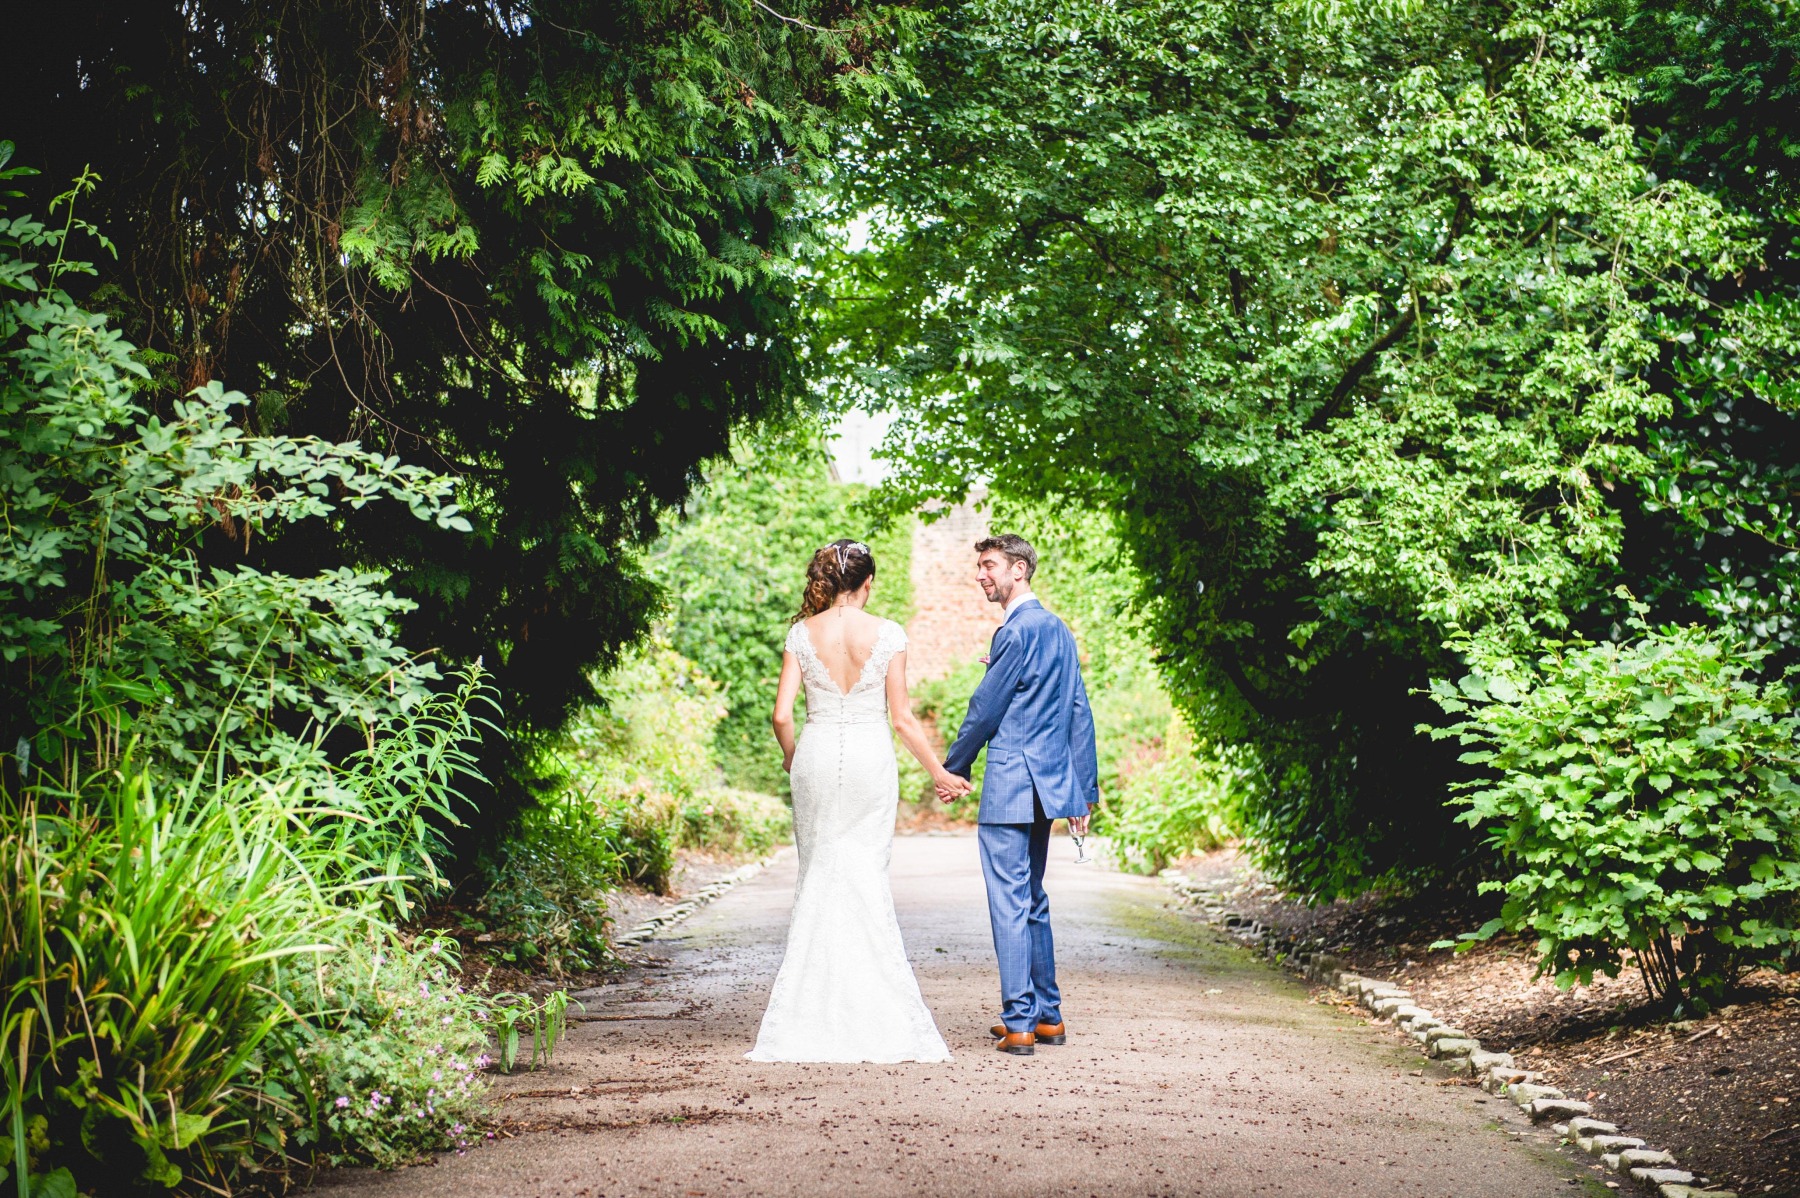 A bride and groom walking away from the camera on a path under an arch of green trees